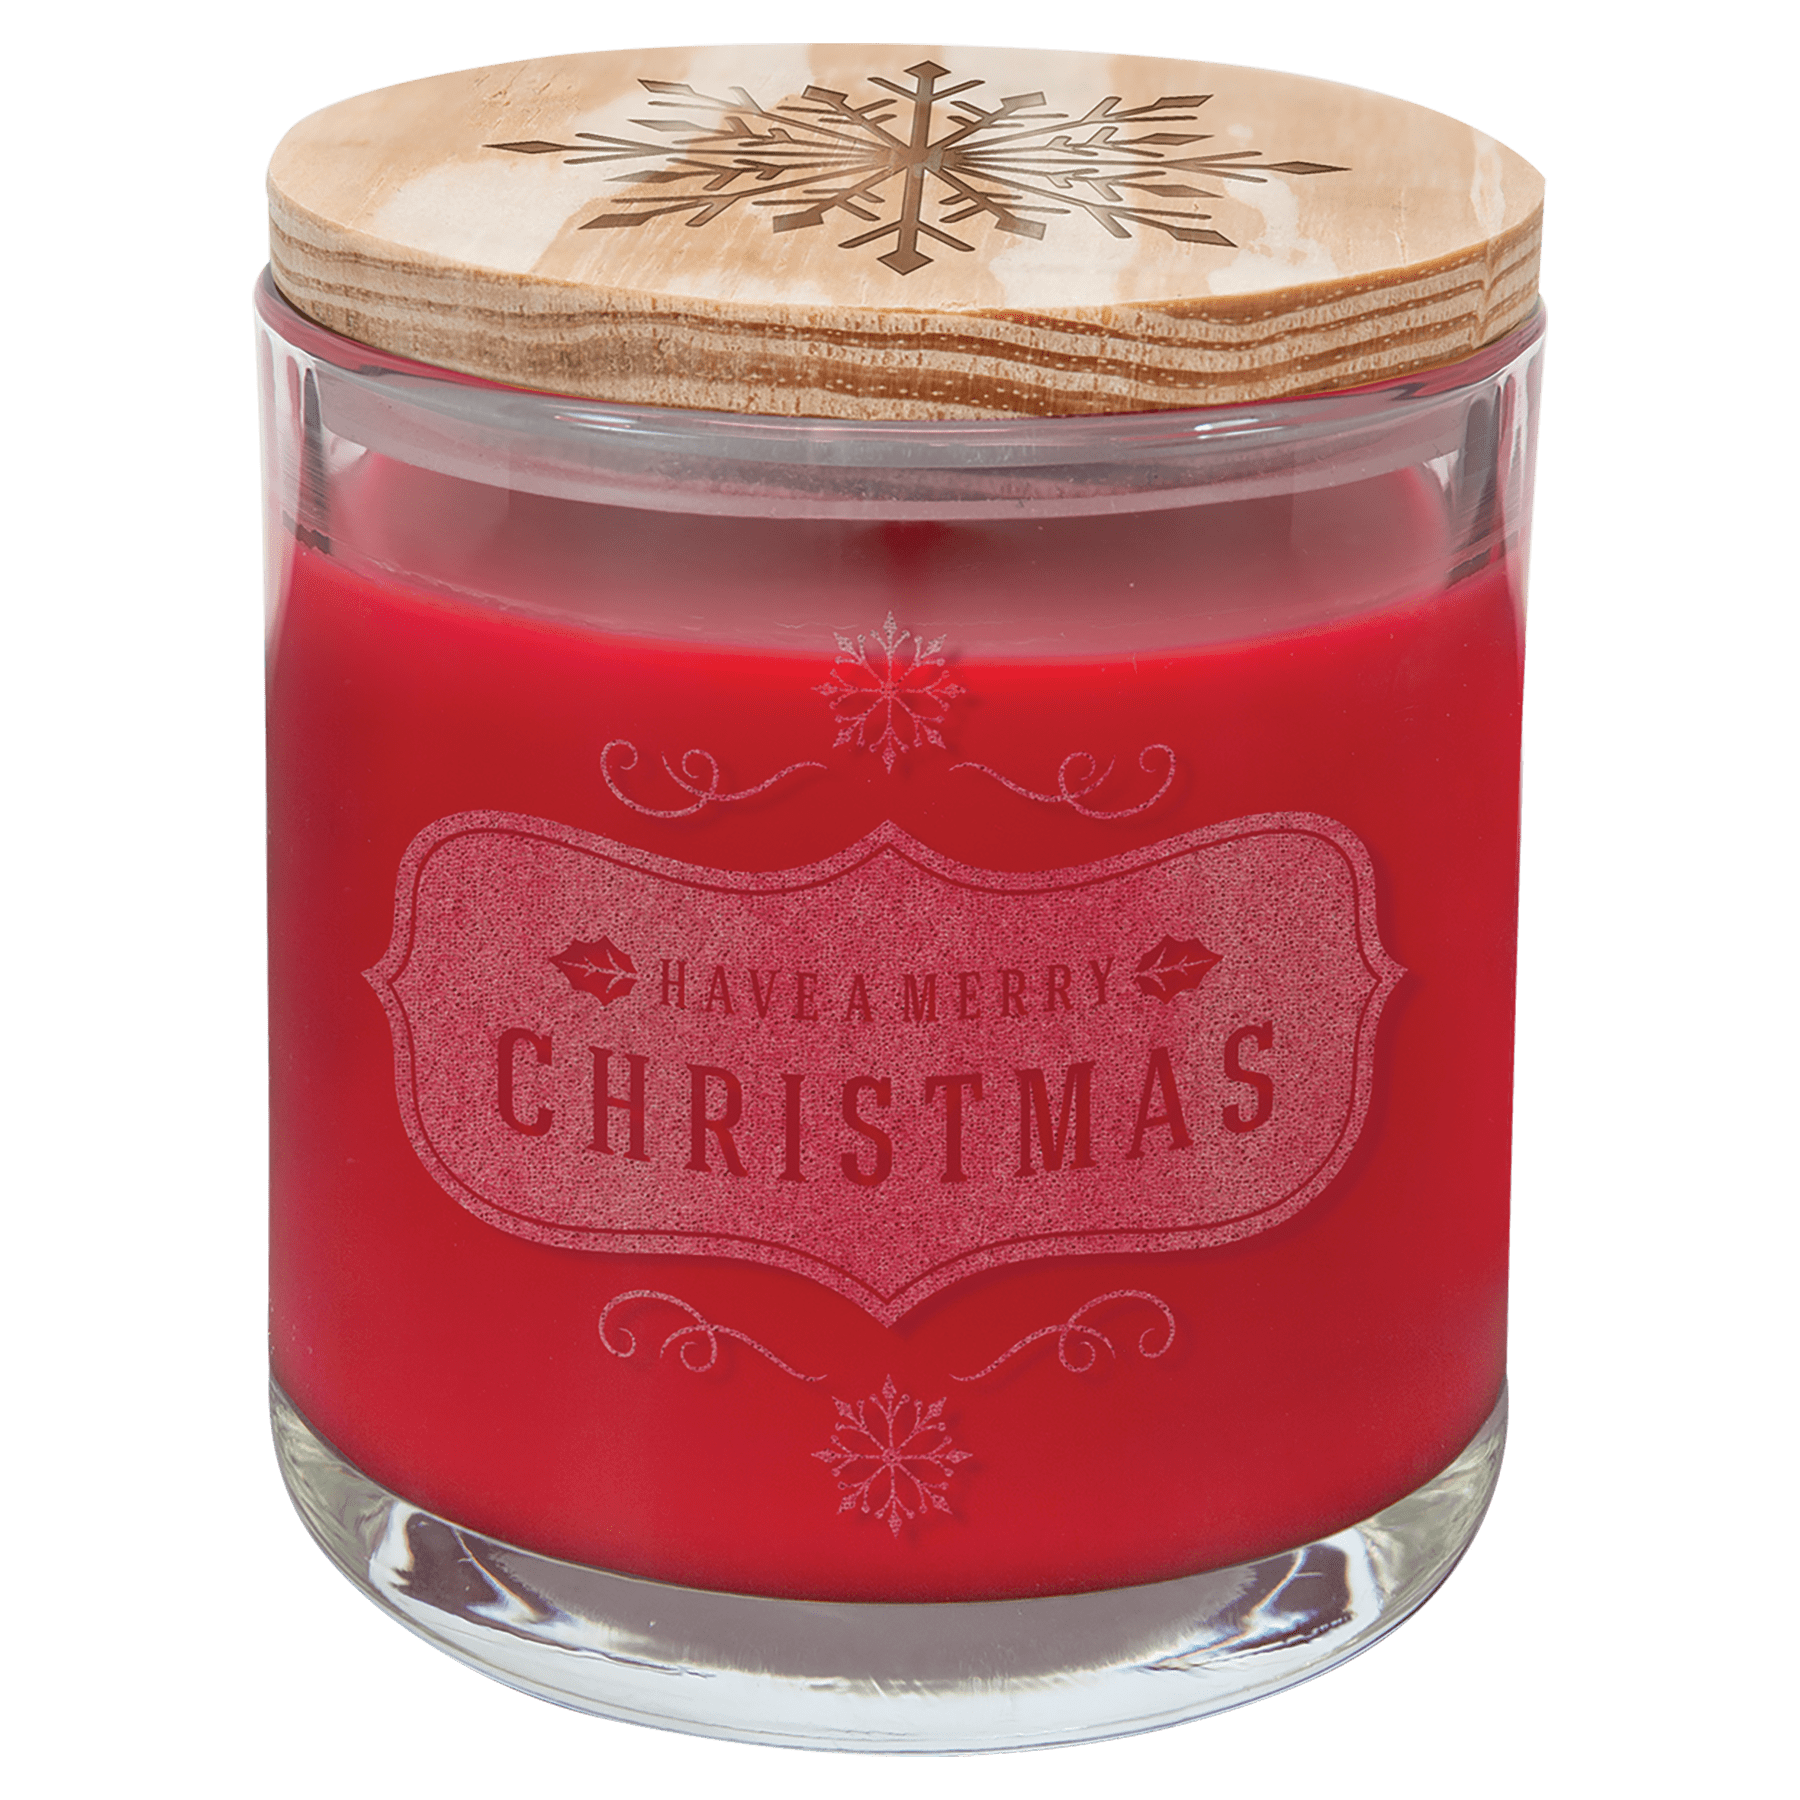 14 oz. Candle in a Glass Holder with Wood Lid